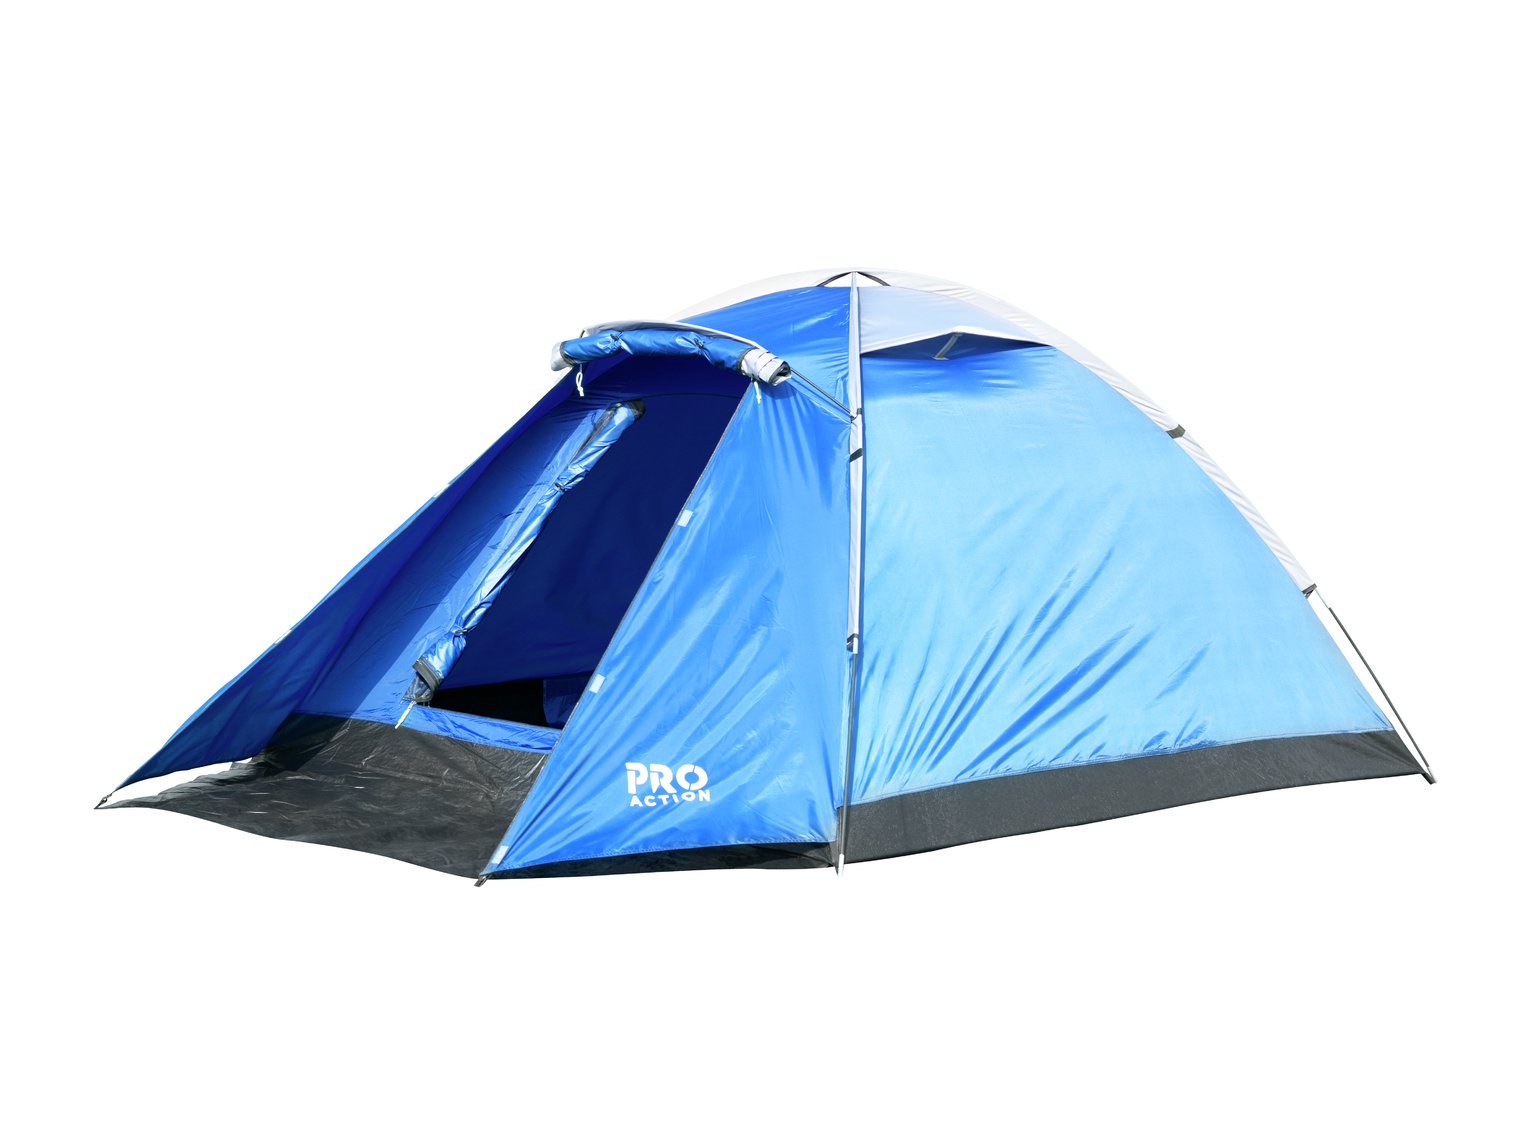 Pro Action 4 Person 1 Room Dome Camping Tent with Porch